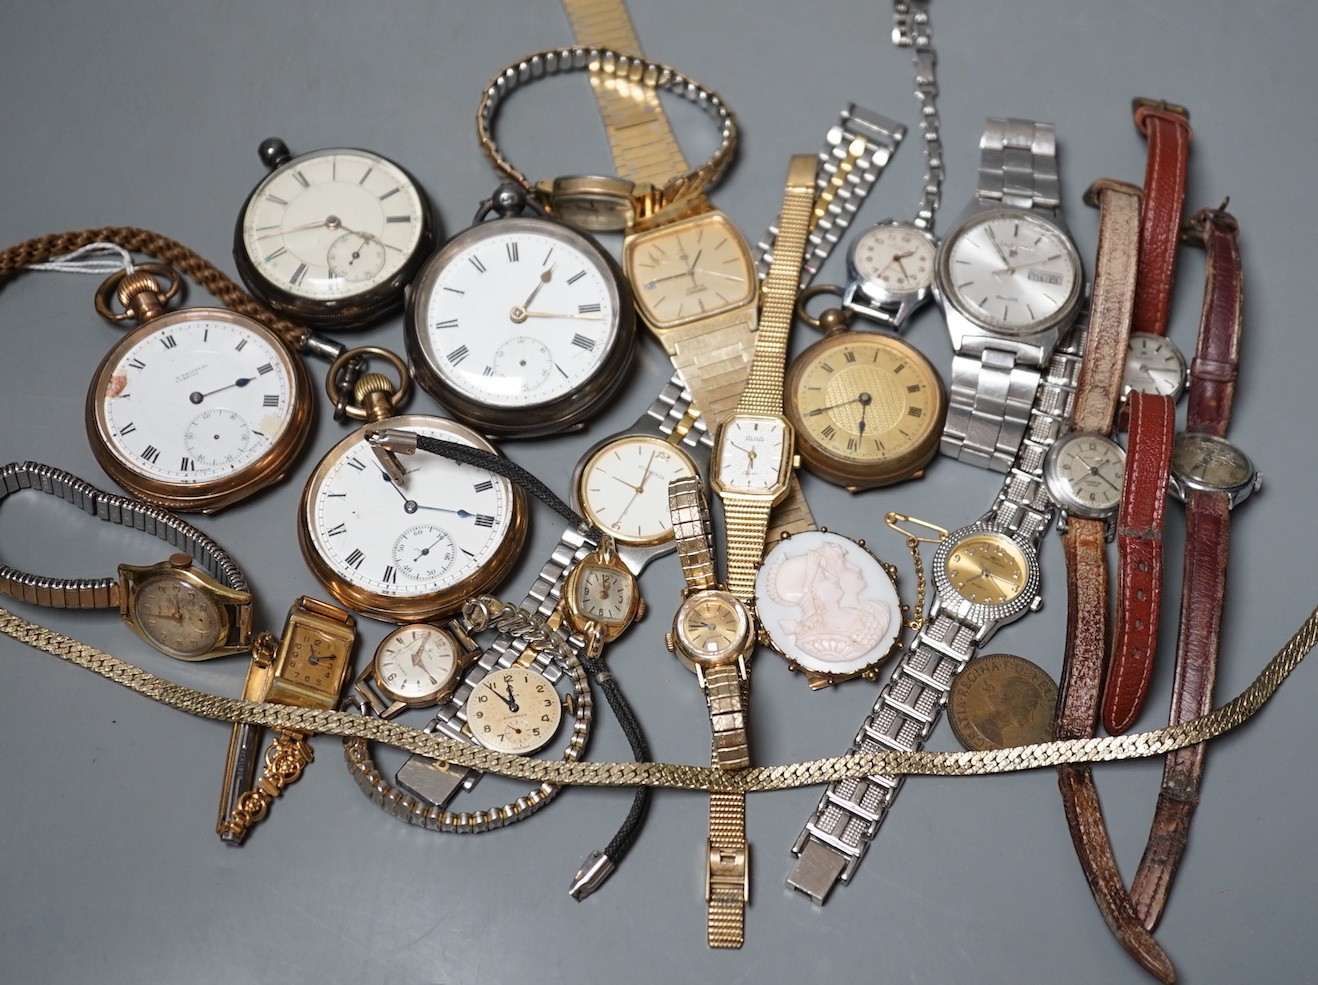 Four assorted pocket watches including tow silver and two gold plated, a brass cased fob watch and a group of sundry lady's and gentleman's mainly modern wrist watches, including Pulsar.